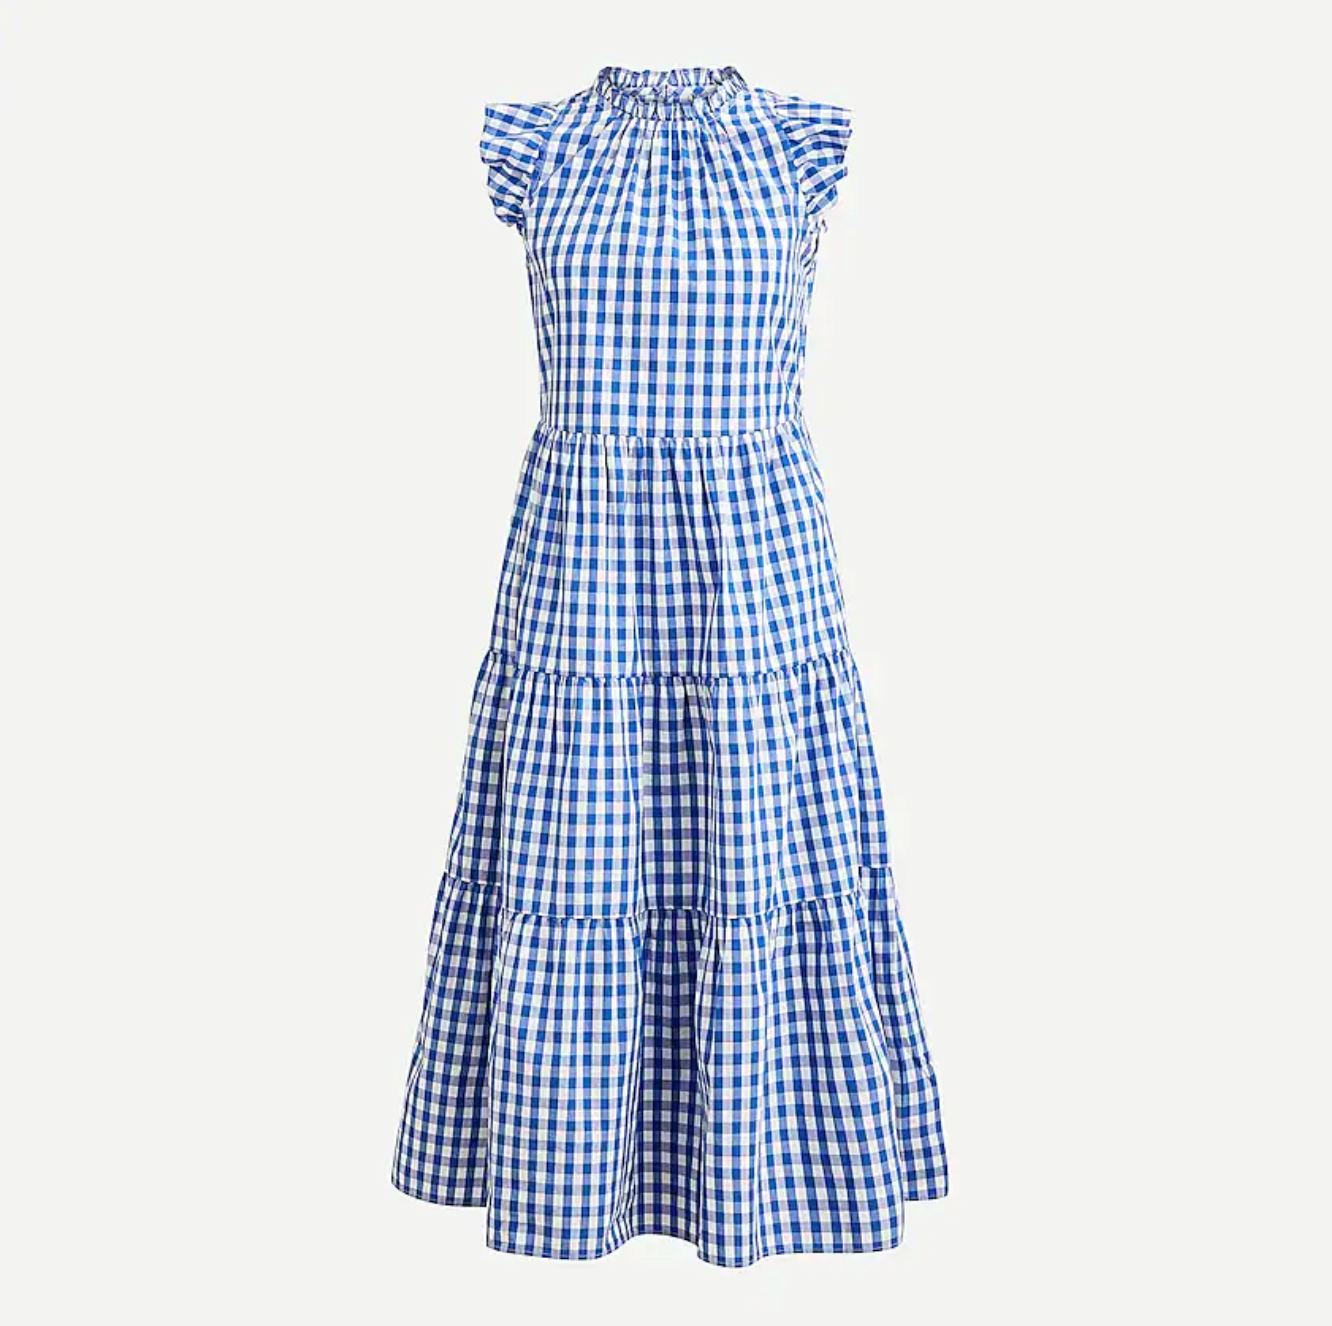 Our Summer Dress Wishlist! — Pencil & Paper Co.